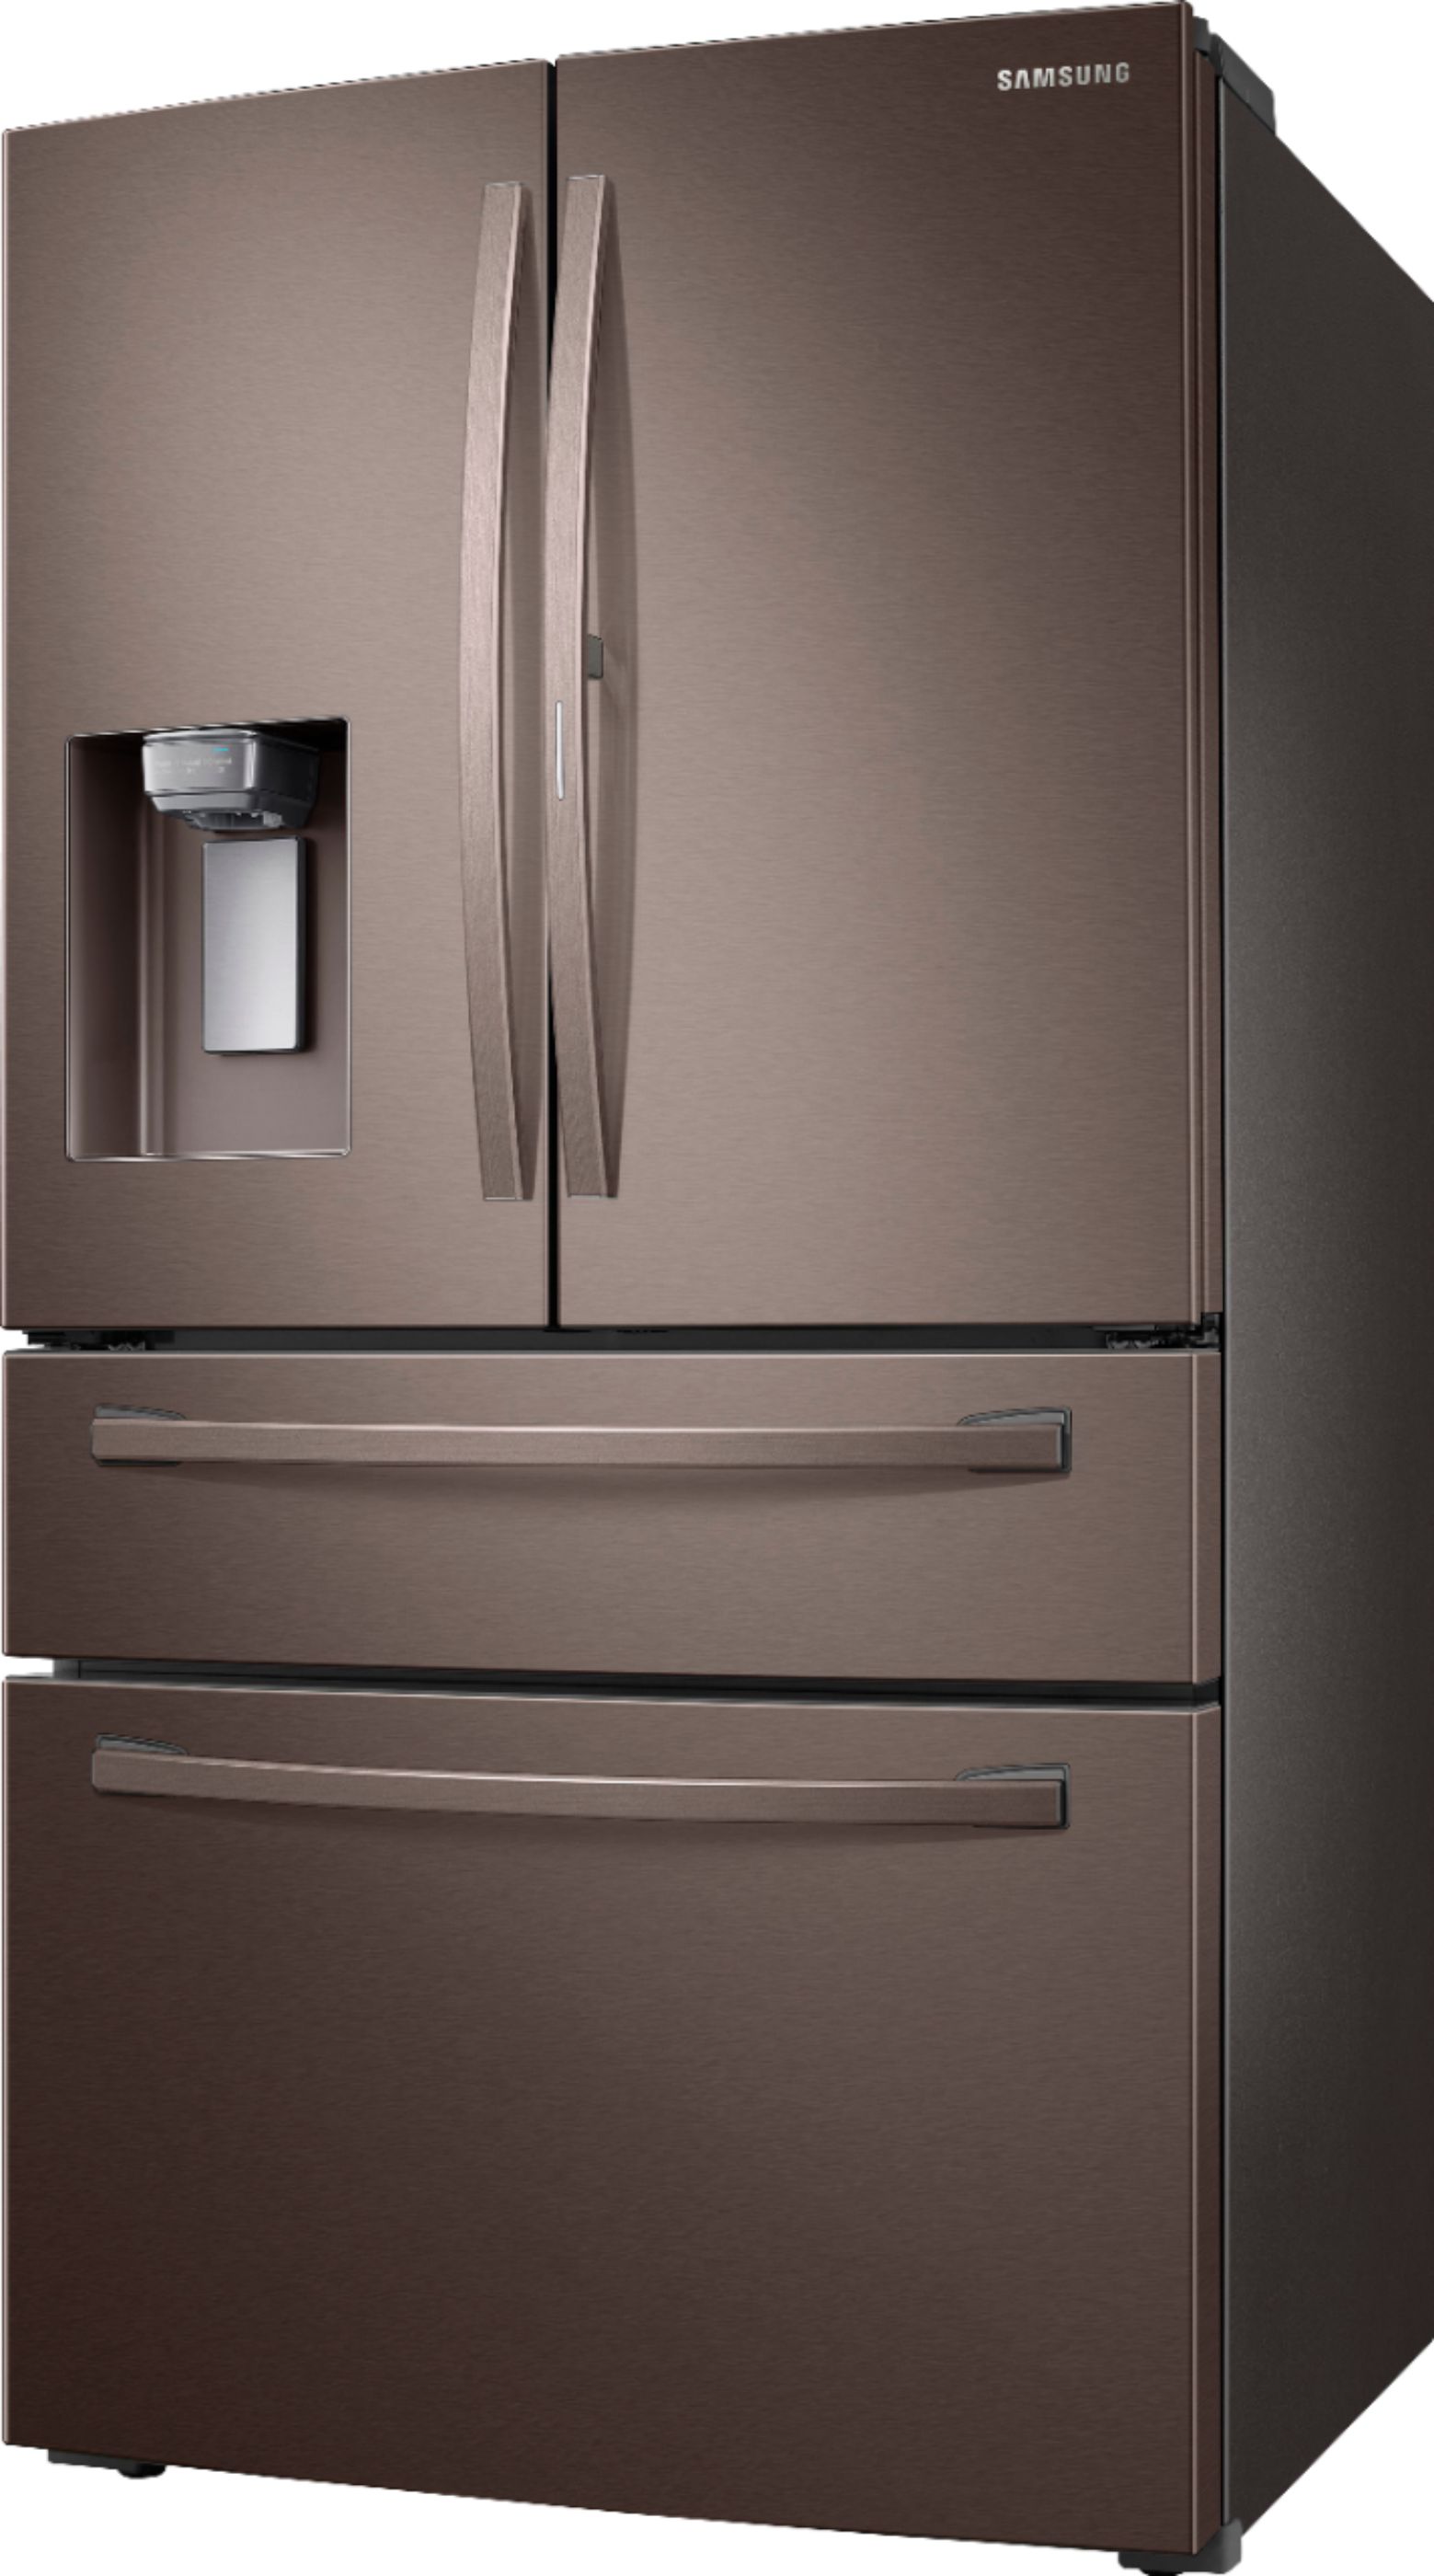 Left View: Samsung - 27.8 Cu. Ft. 4-Door French Door Refrigerator with Food Showcase - Tuscan stainless steel